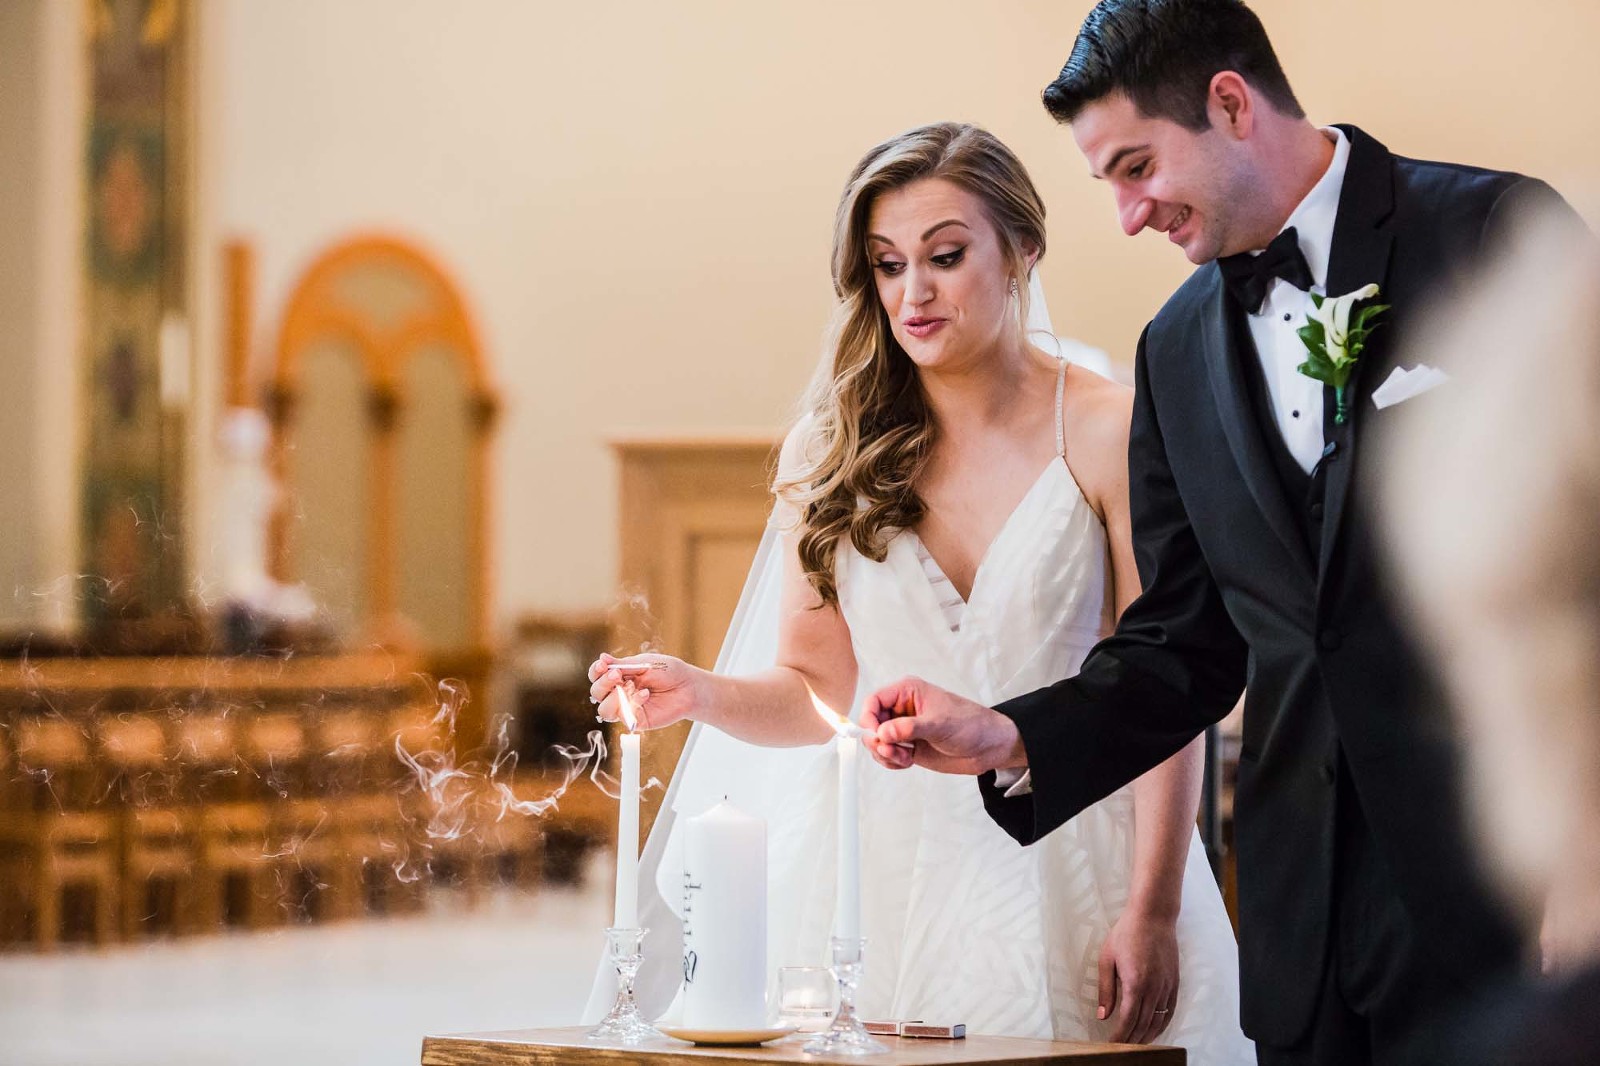 bride and groom at st. vincent basilica church wedding ceremony, lighting unity candle and making funny faces